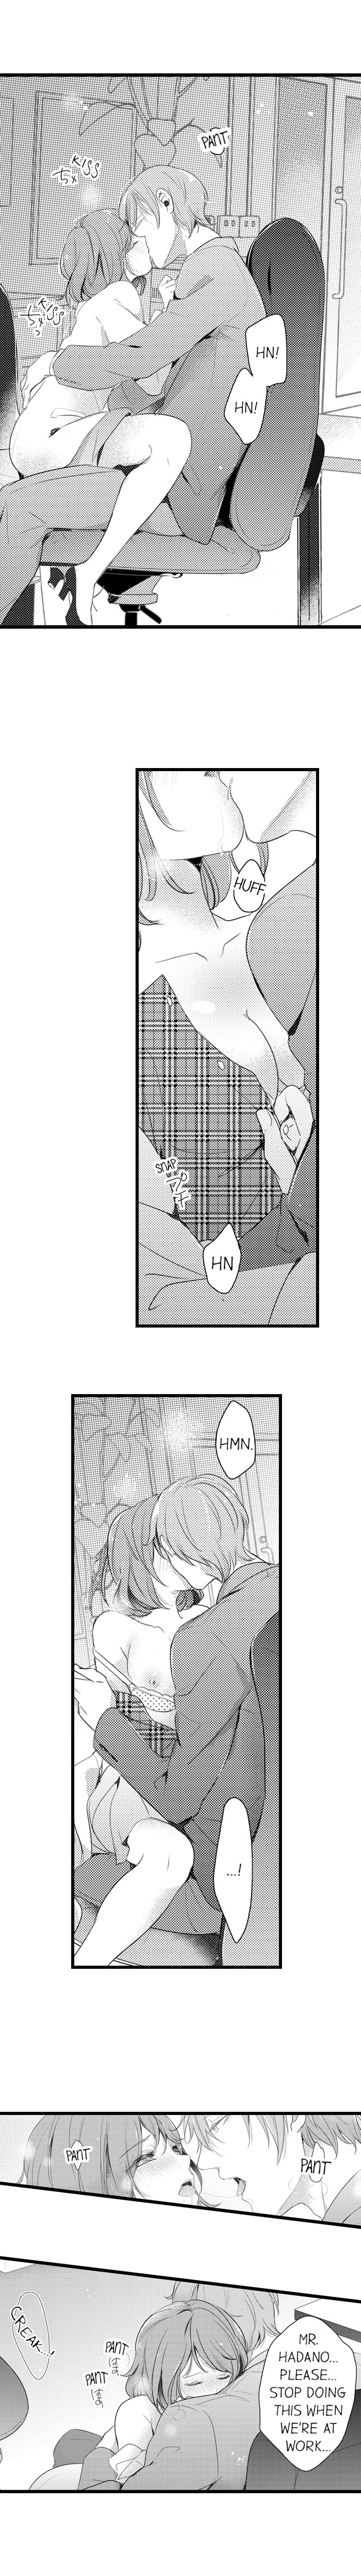 A Hot Night With My Boss in a Capsule Hotel - Chapter 12 Page 6